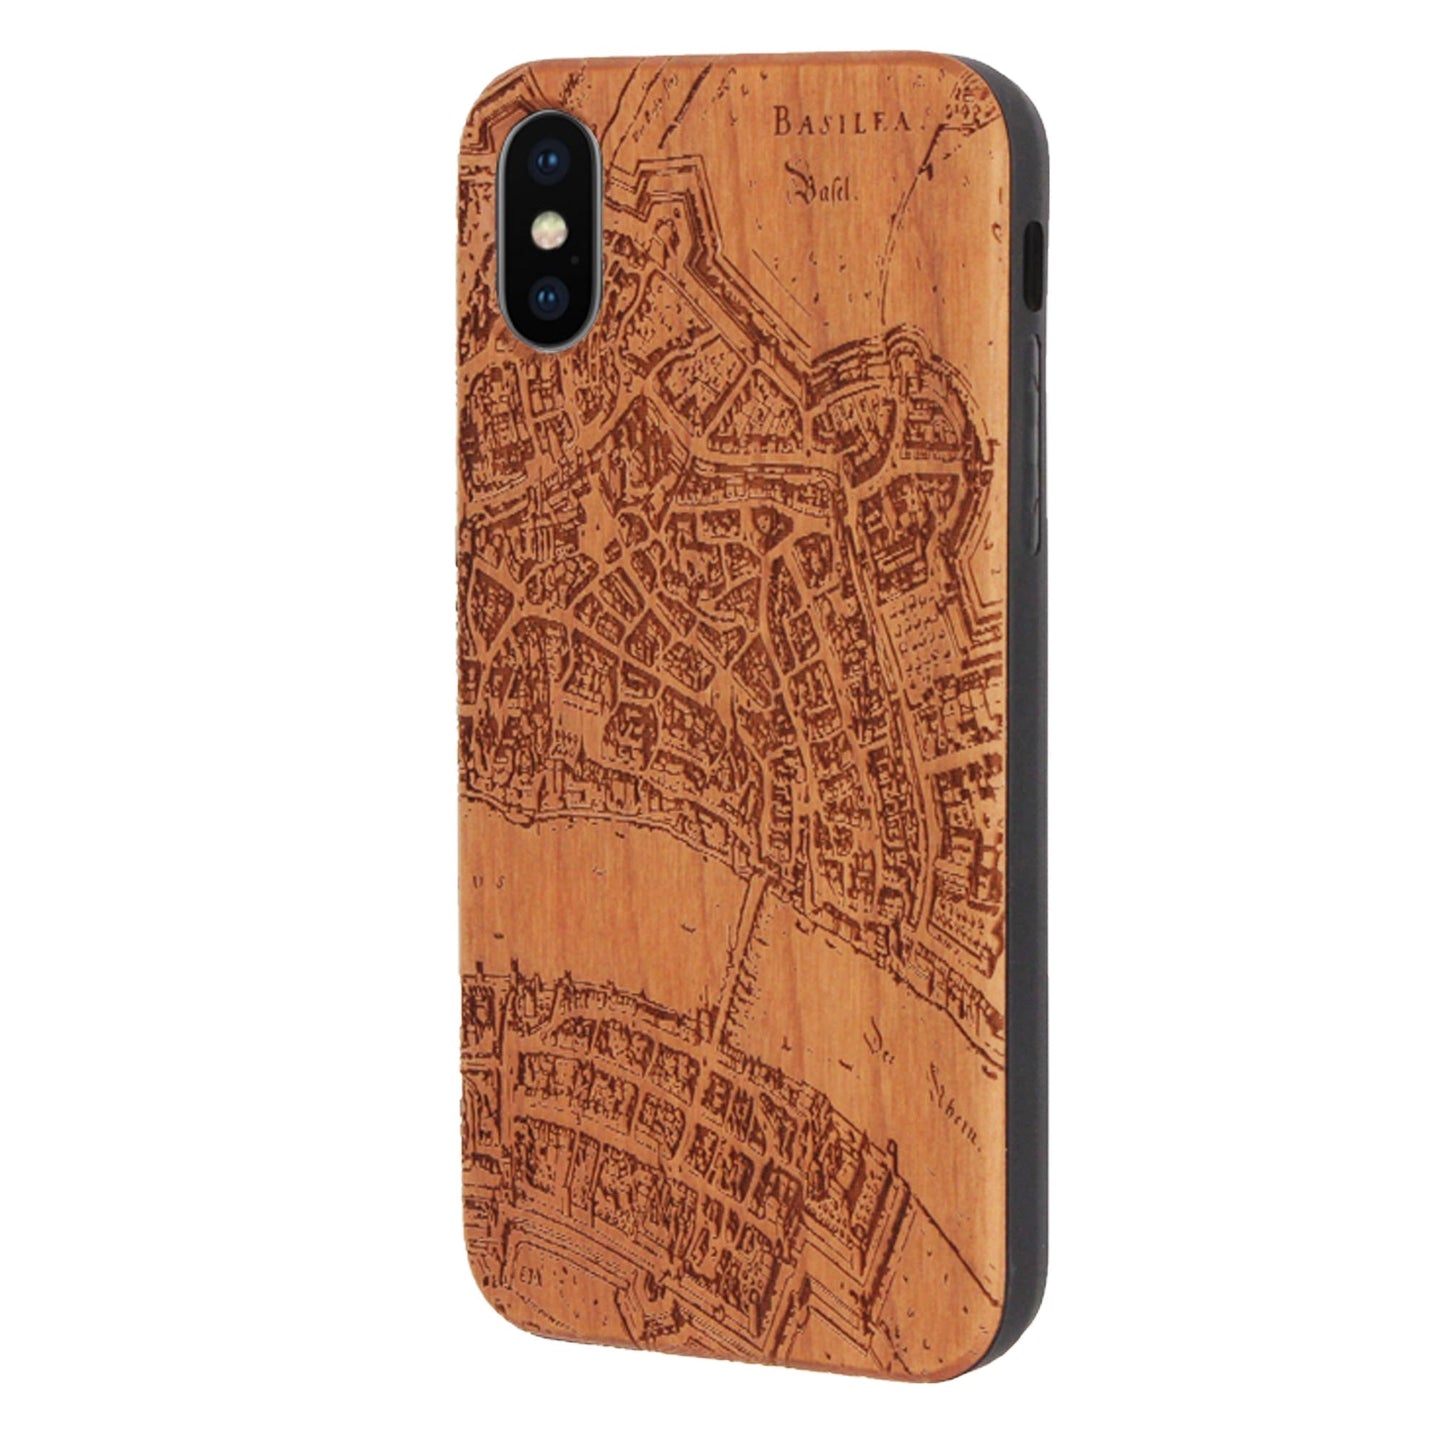 Basel Merian Eden case made of cherry wood for iPhone XS Max